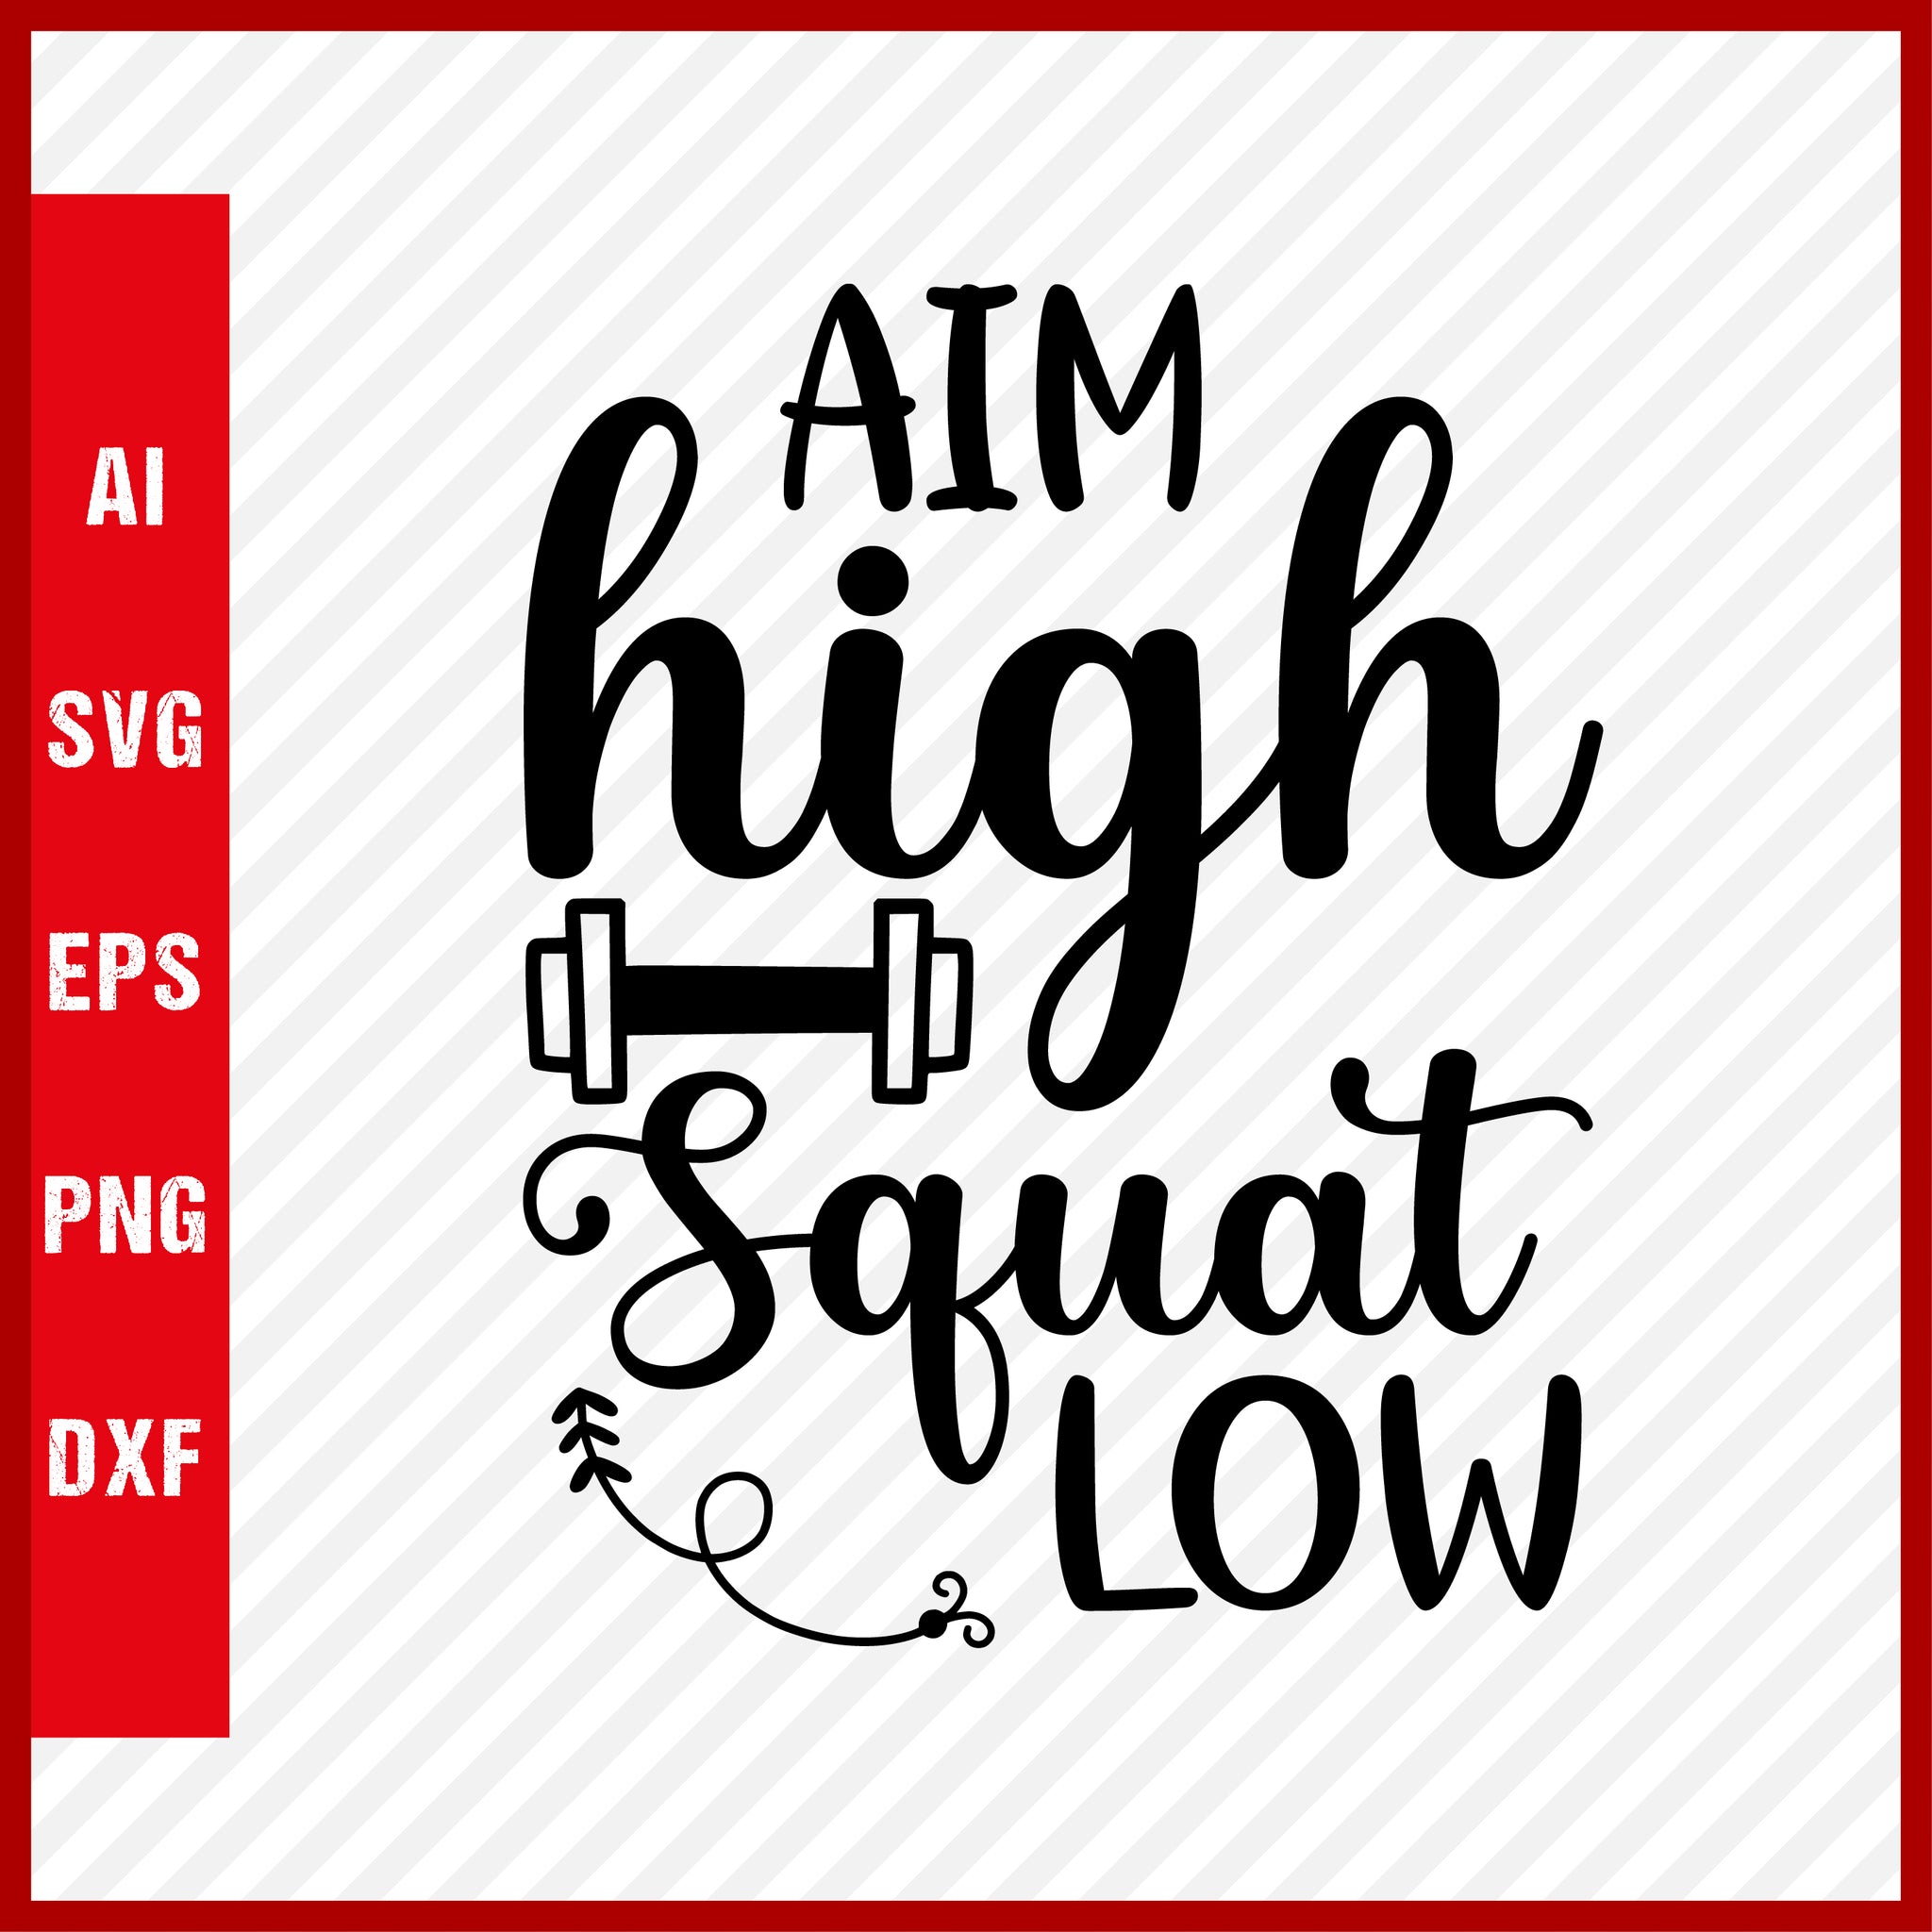 Aim High, Squat Low | Gym Weightlifting Working Out Premium T-Shirt